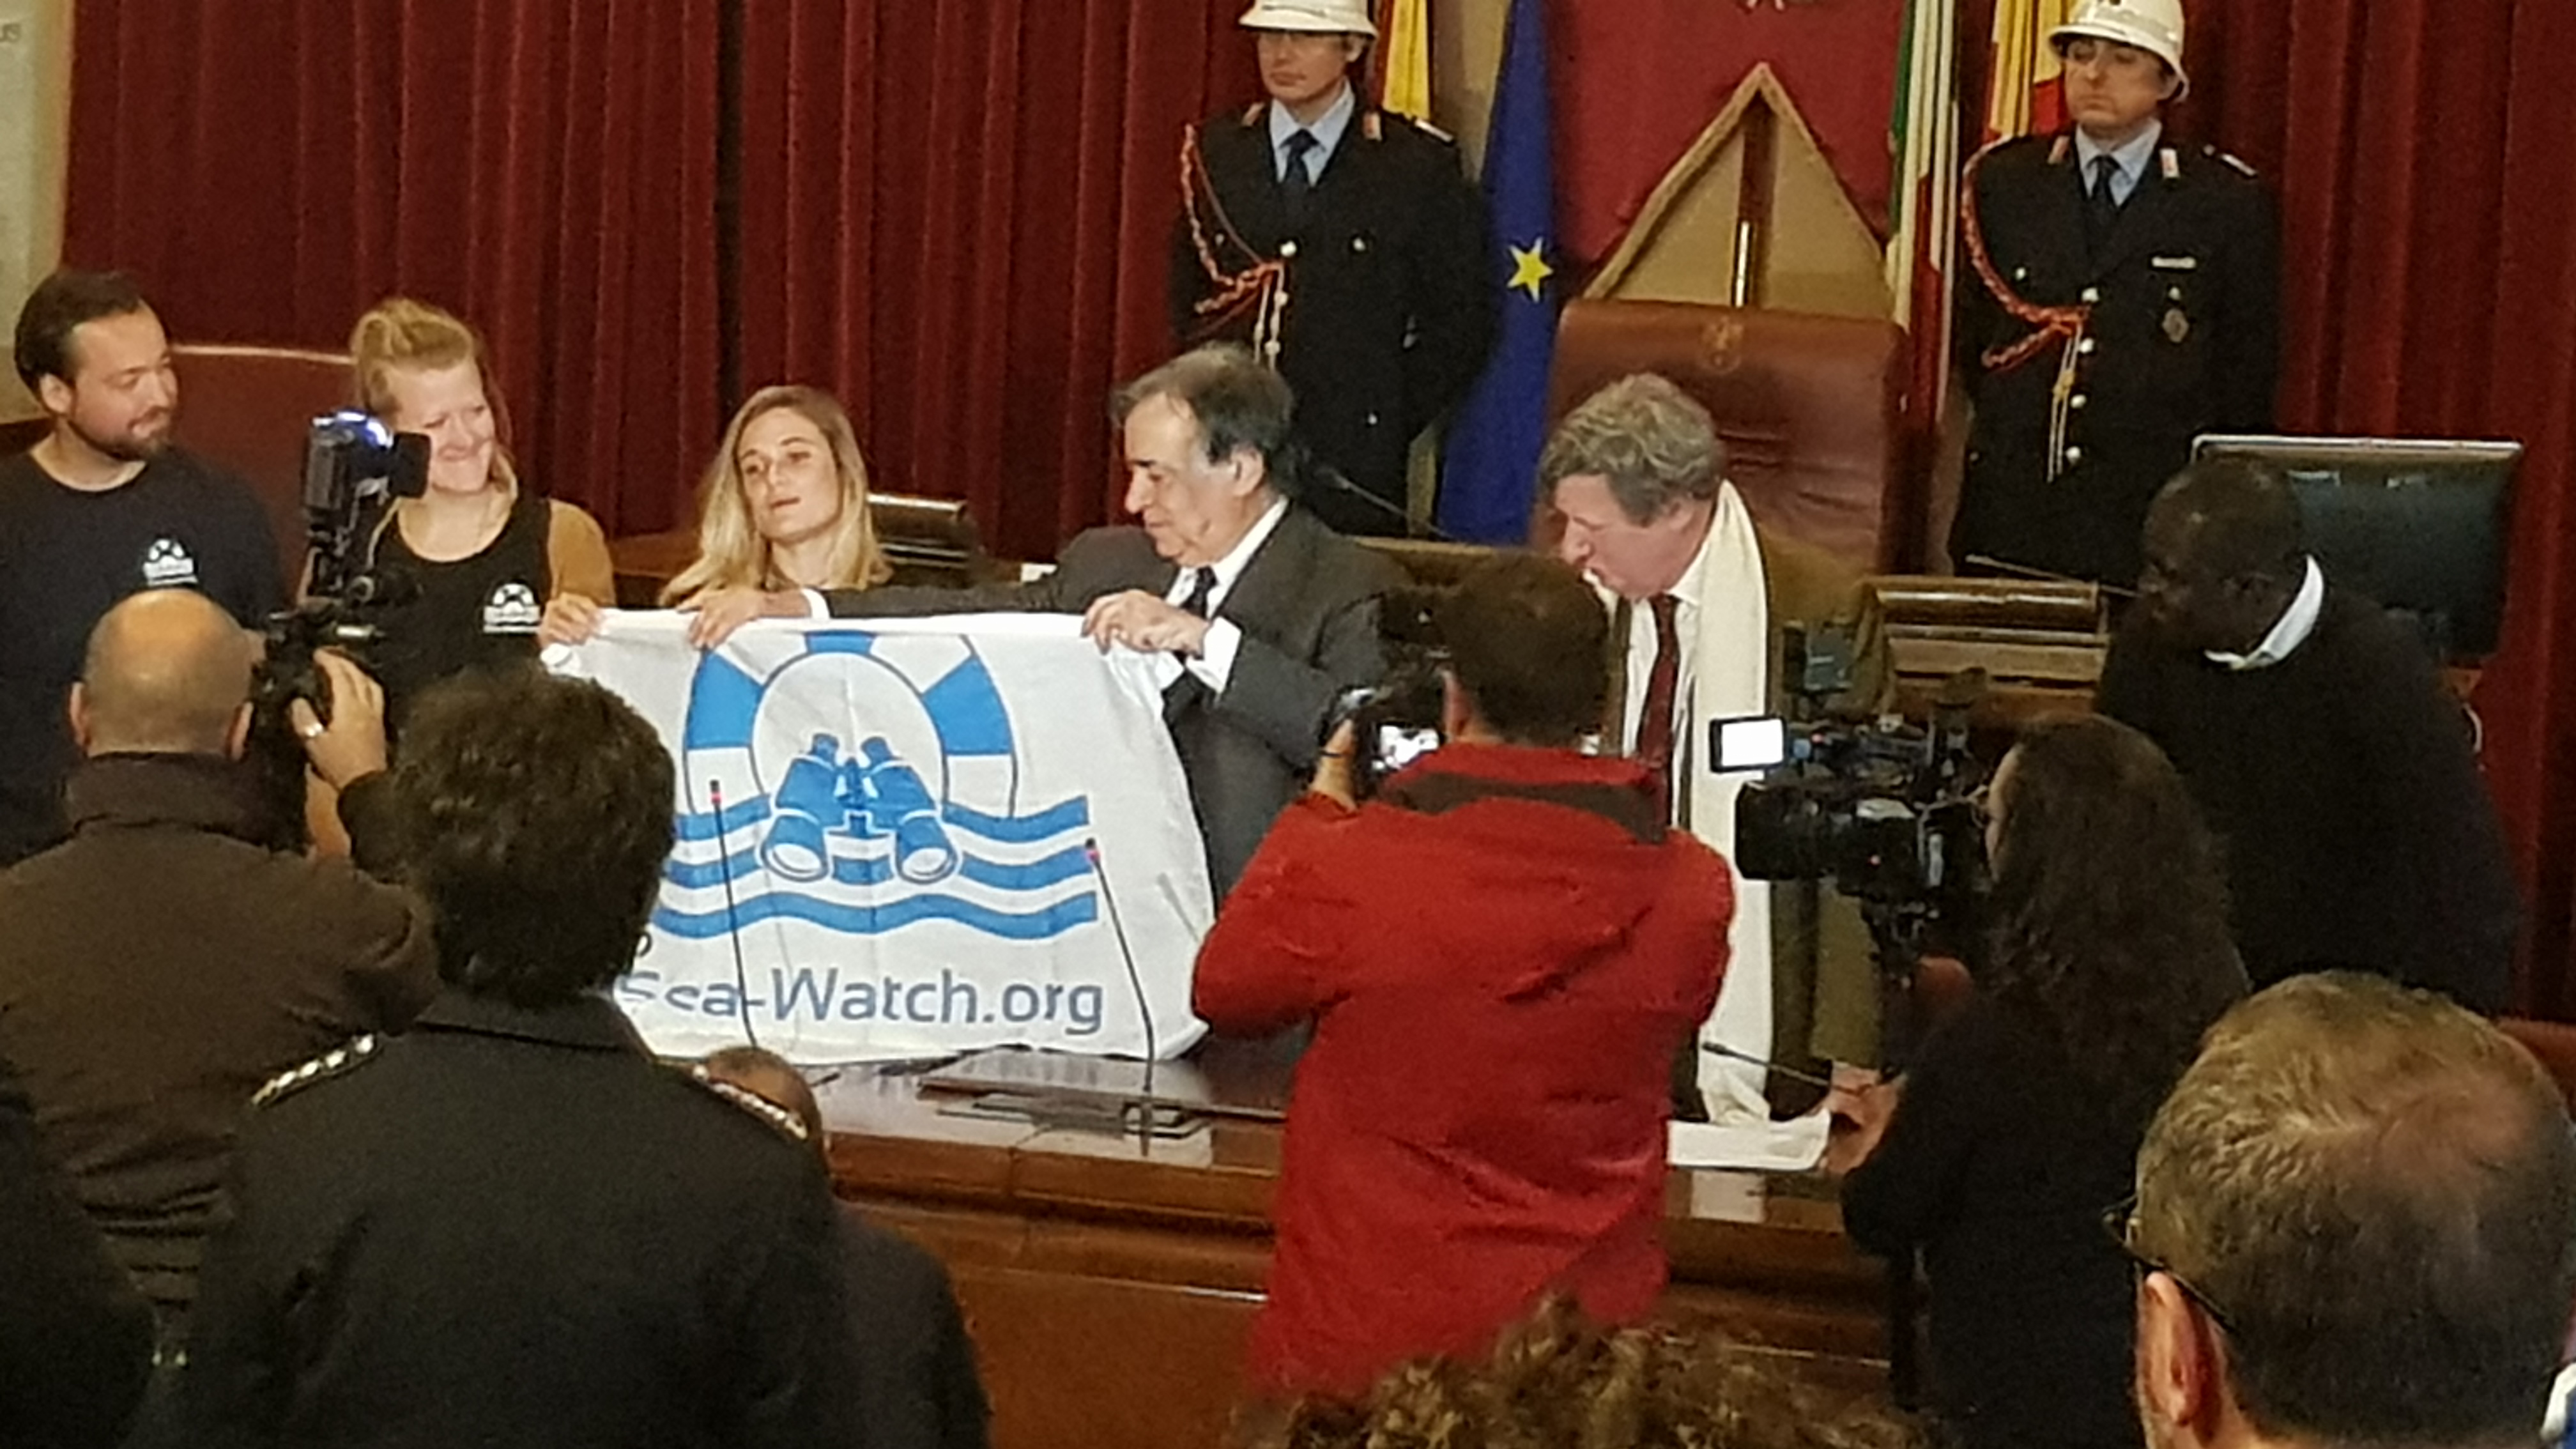 Ceremony for honorary citizenship to the crew of Sea Watch in the city hall of Palermo. Mayor Leoluca Orlando (center) and Johannes Dohnanyi (right).